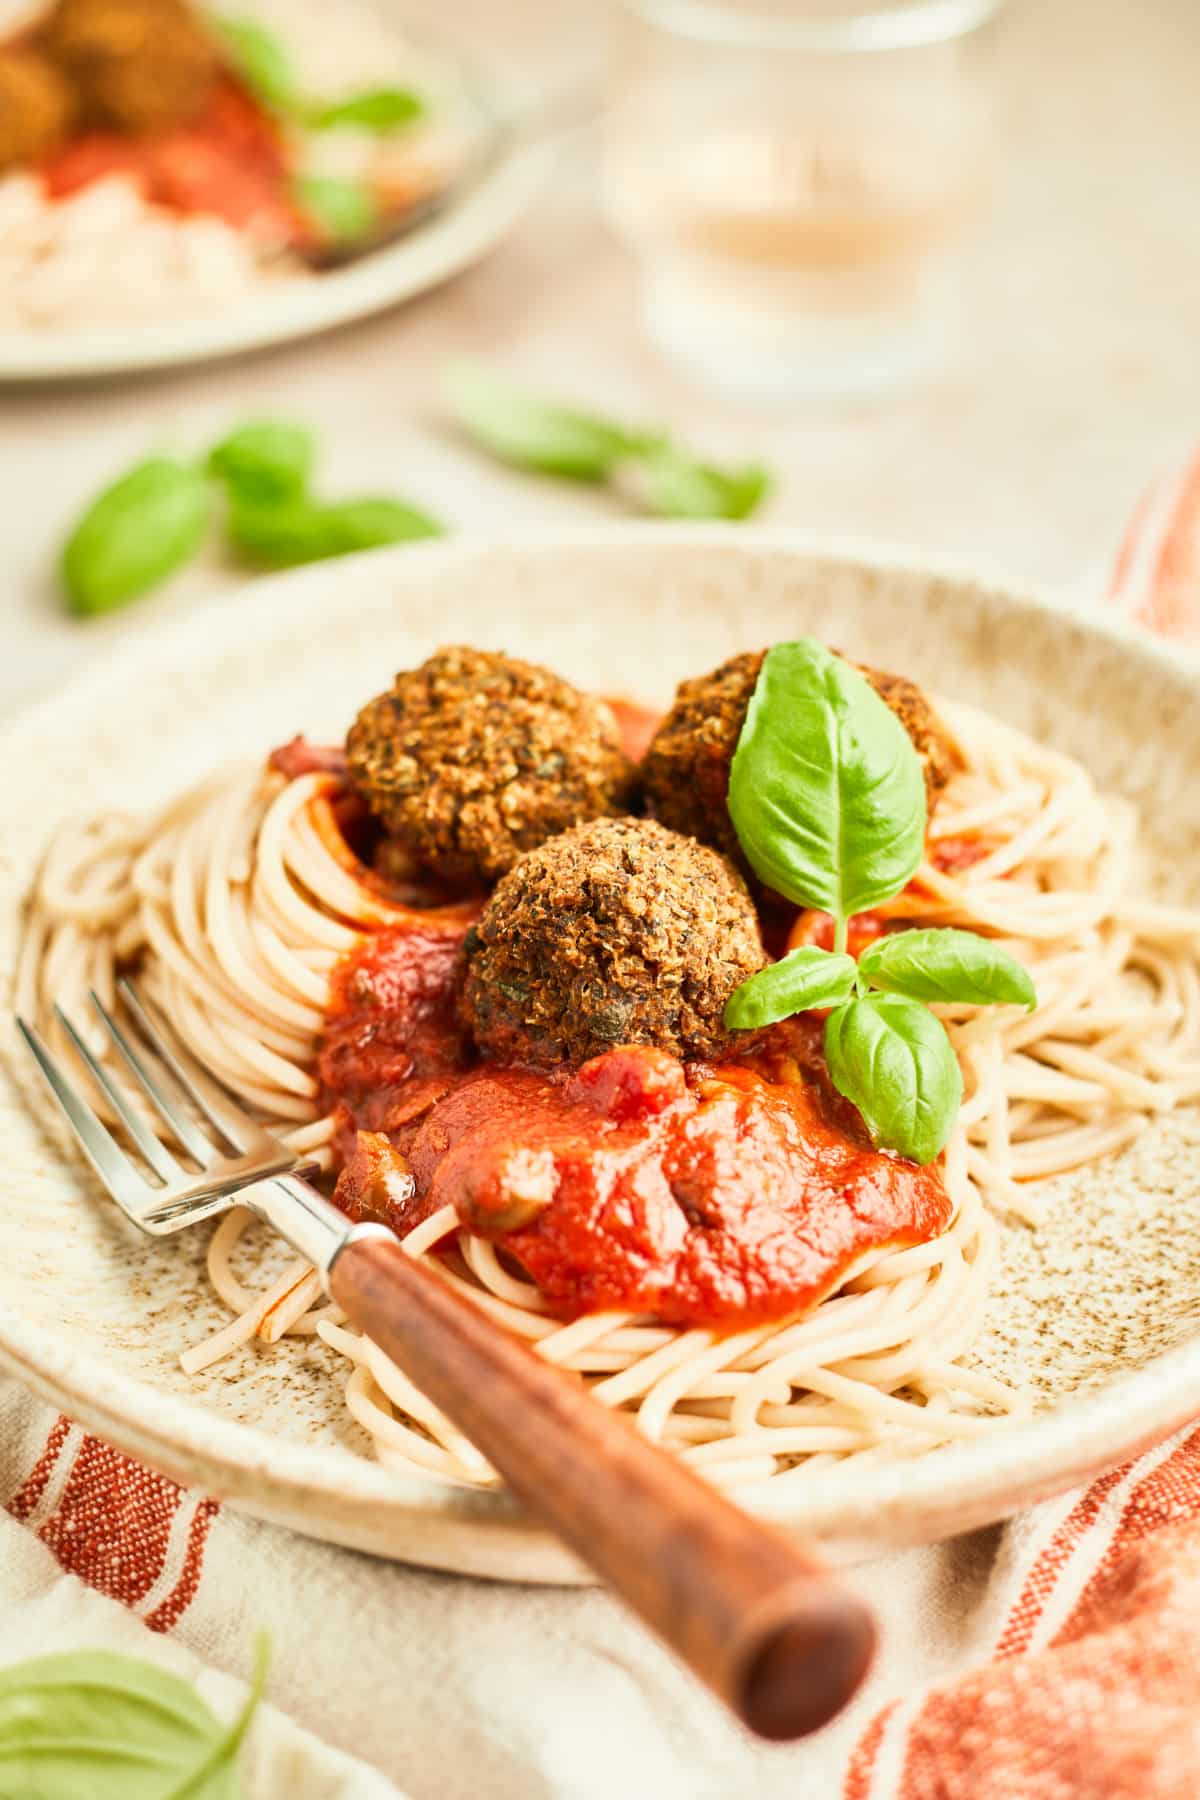 Three basil quinoa meatballs over spaghetti noodles with marinara sauce on a light beige rustic plate with a wood handled fork. Food is garnished with fresh basil, and the plate sits on a red and white striped cloth napkin.